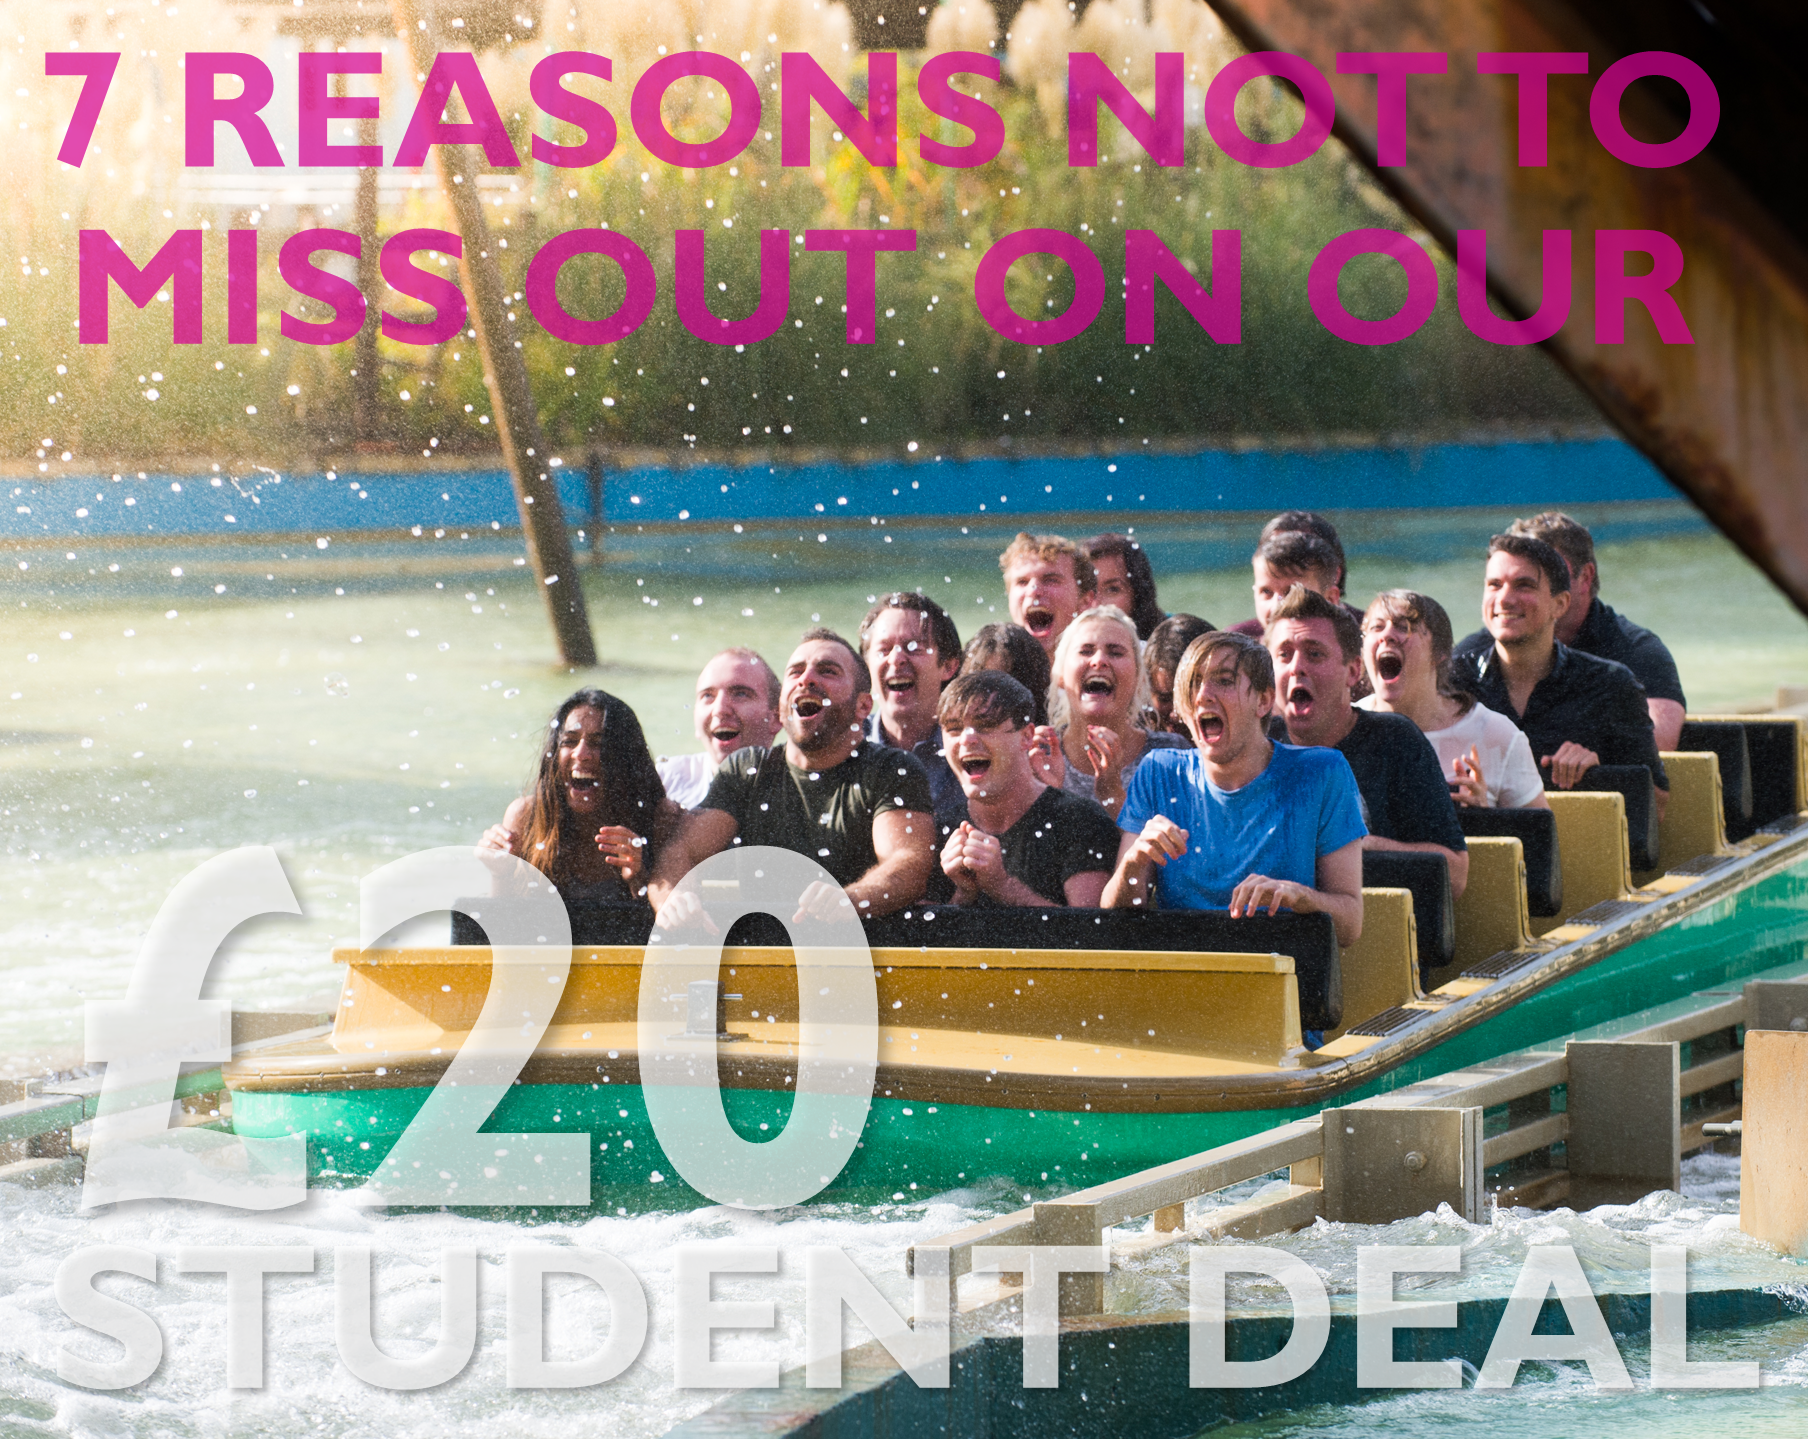 7 Reasons Not To Miss Out On Our £20 Student Deal